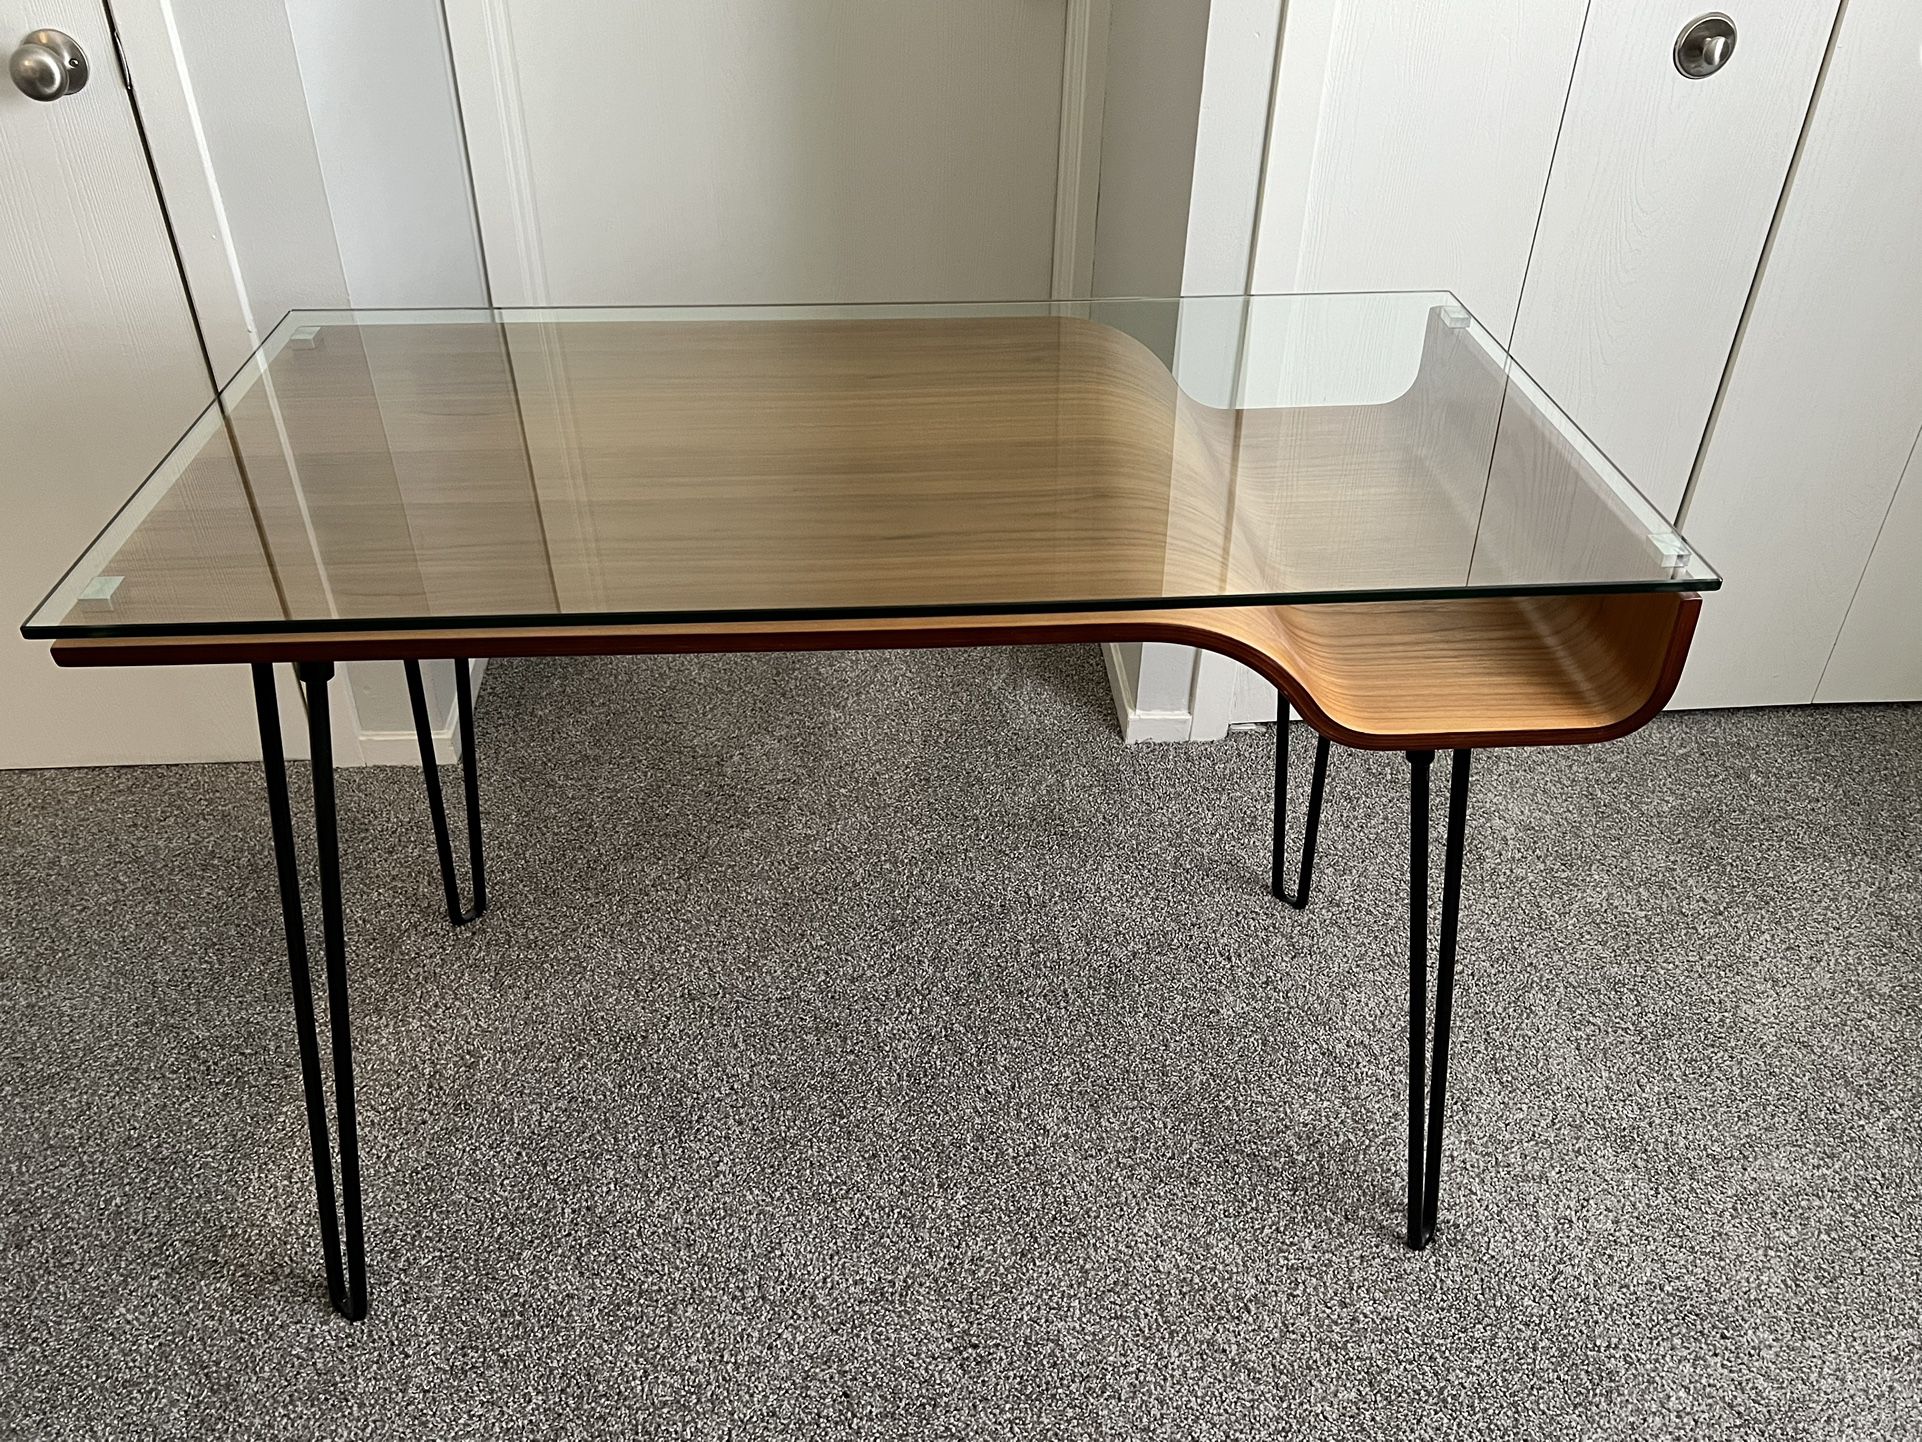 Beautiful Like New Glass Top Wooden Desk - Excellent Condition 